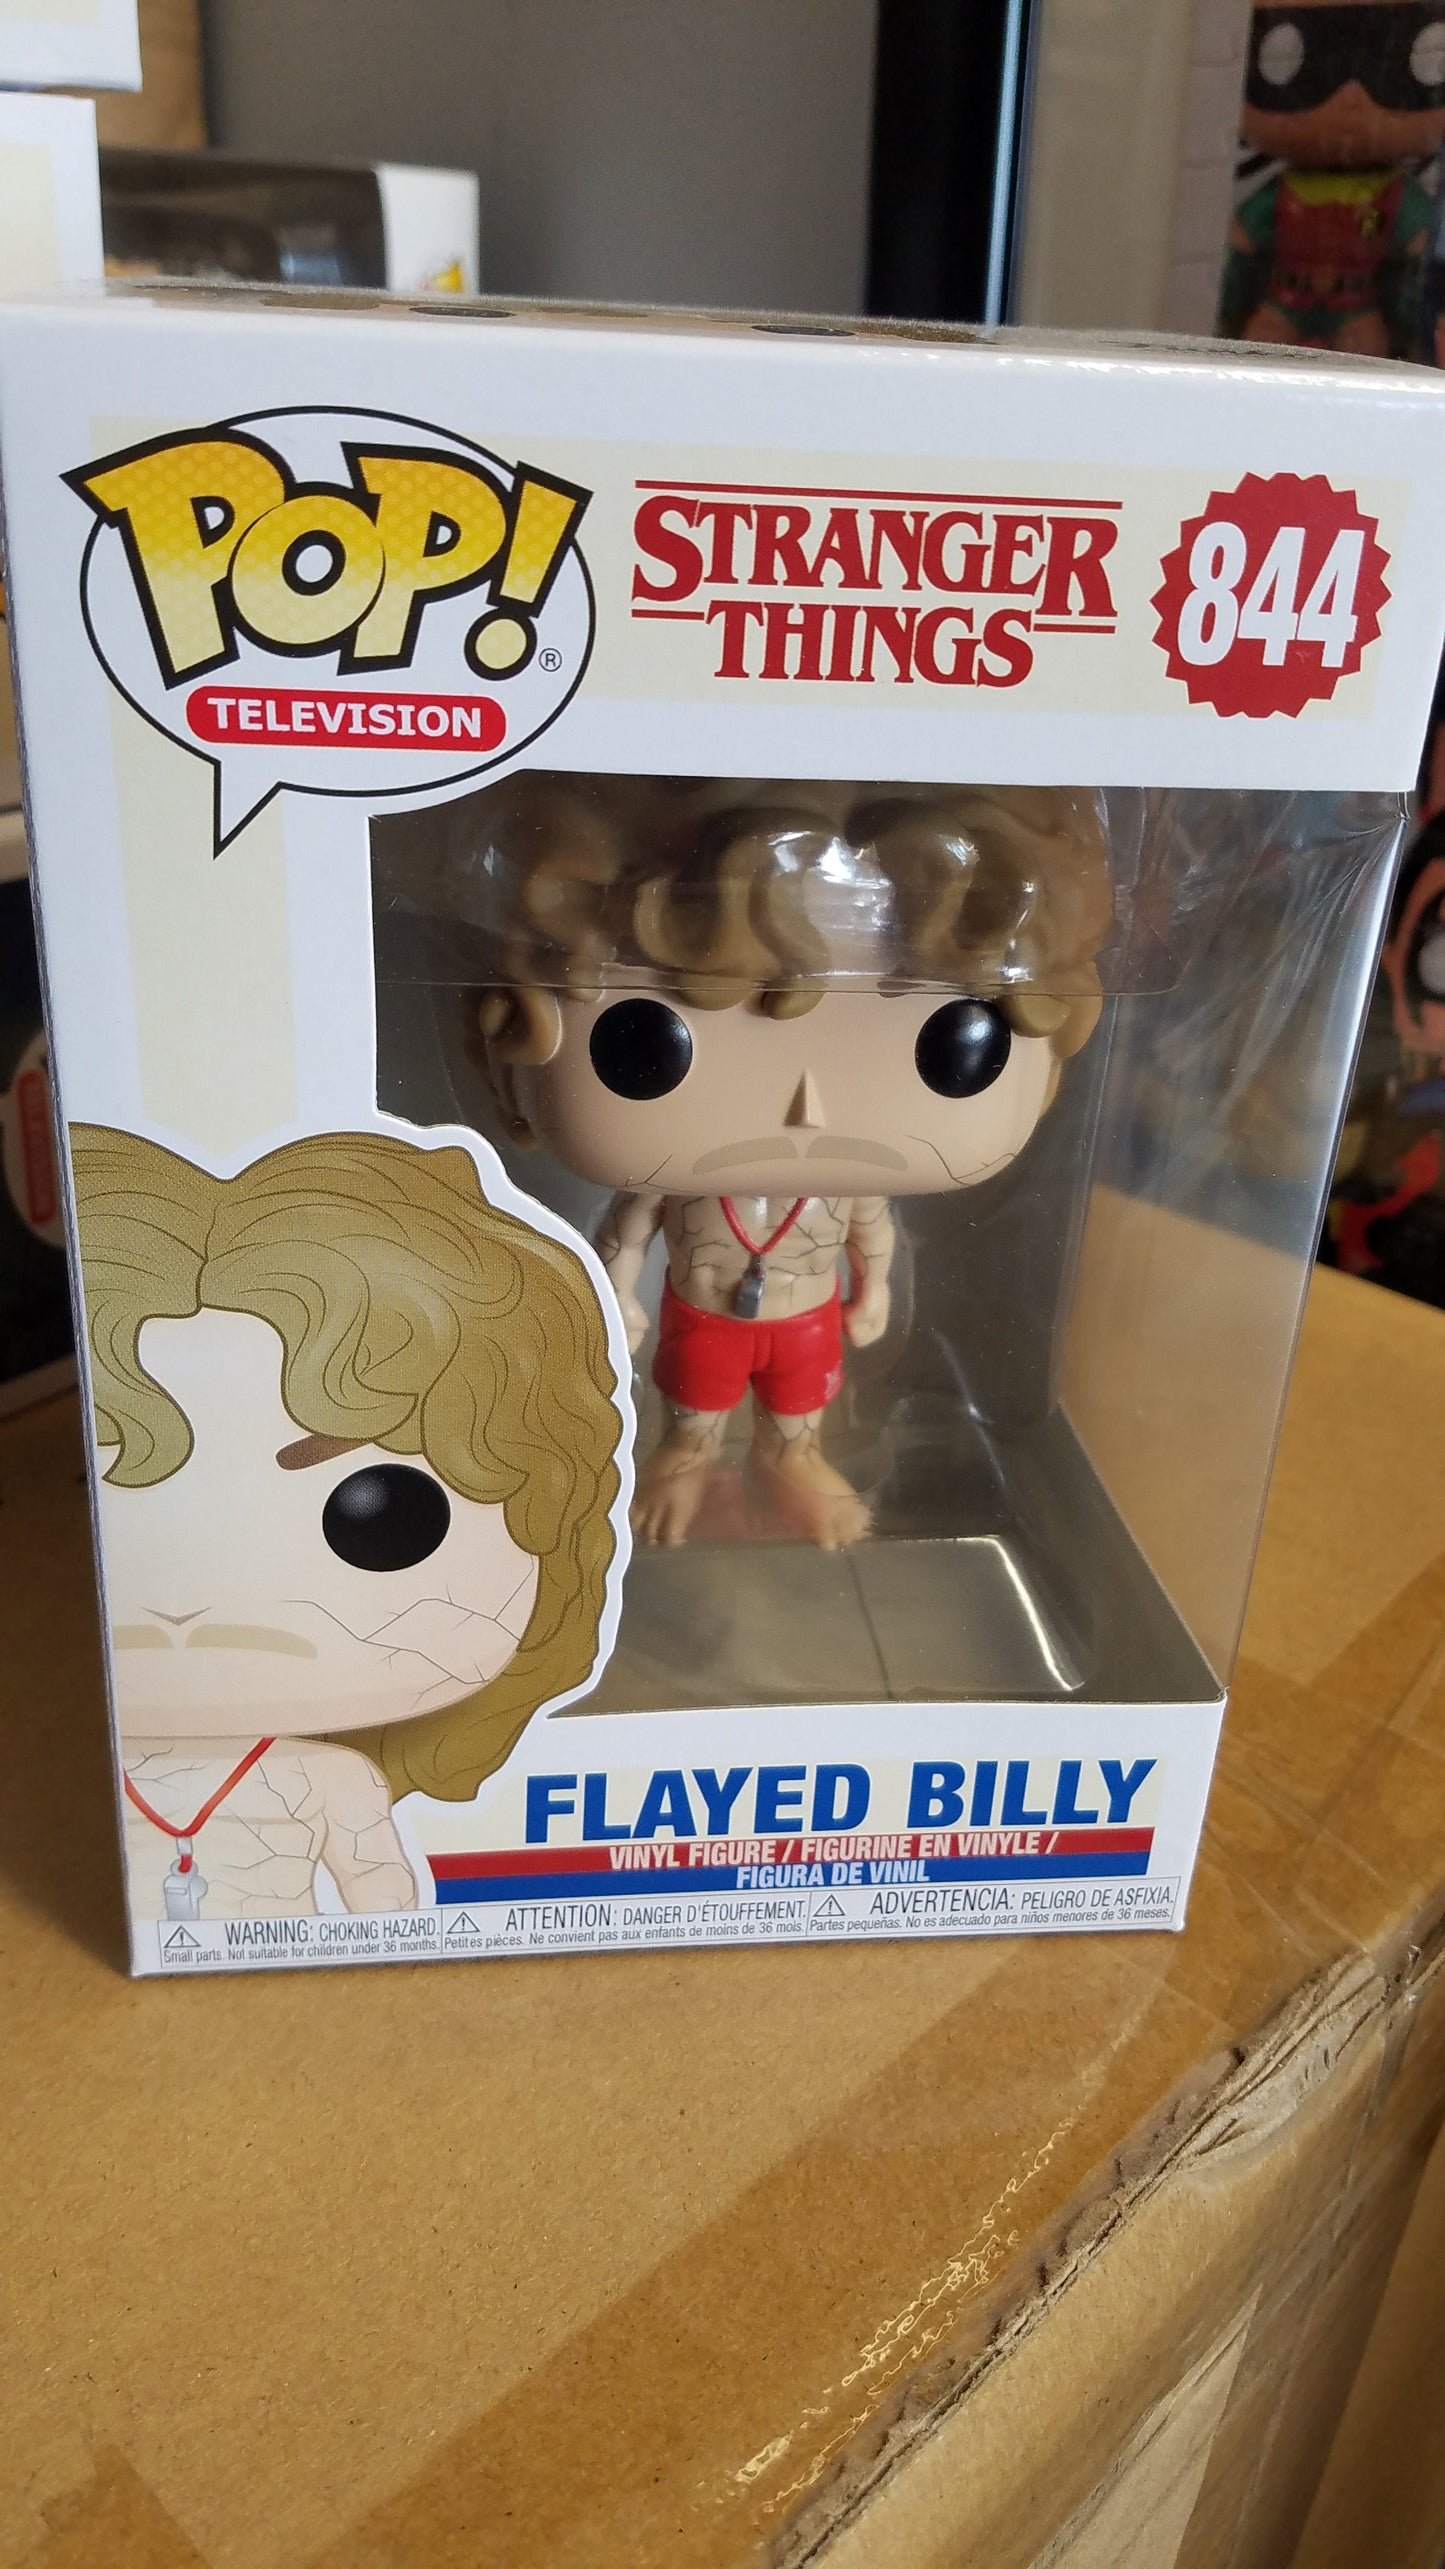 Stranger Things - Flayed Billy #844 - Funko Pop! Vinyl Figure (Television)